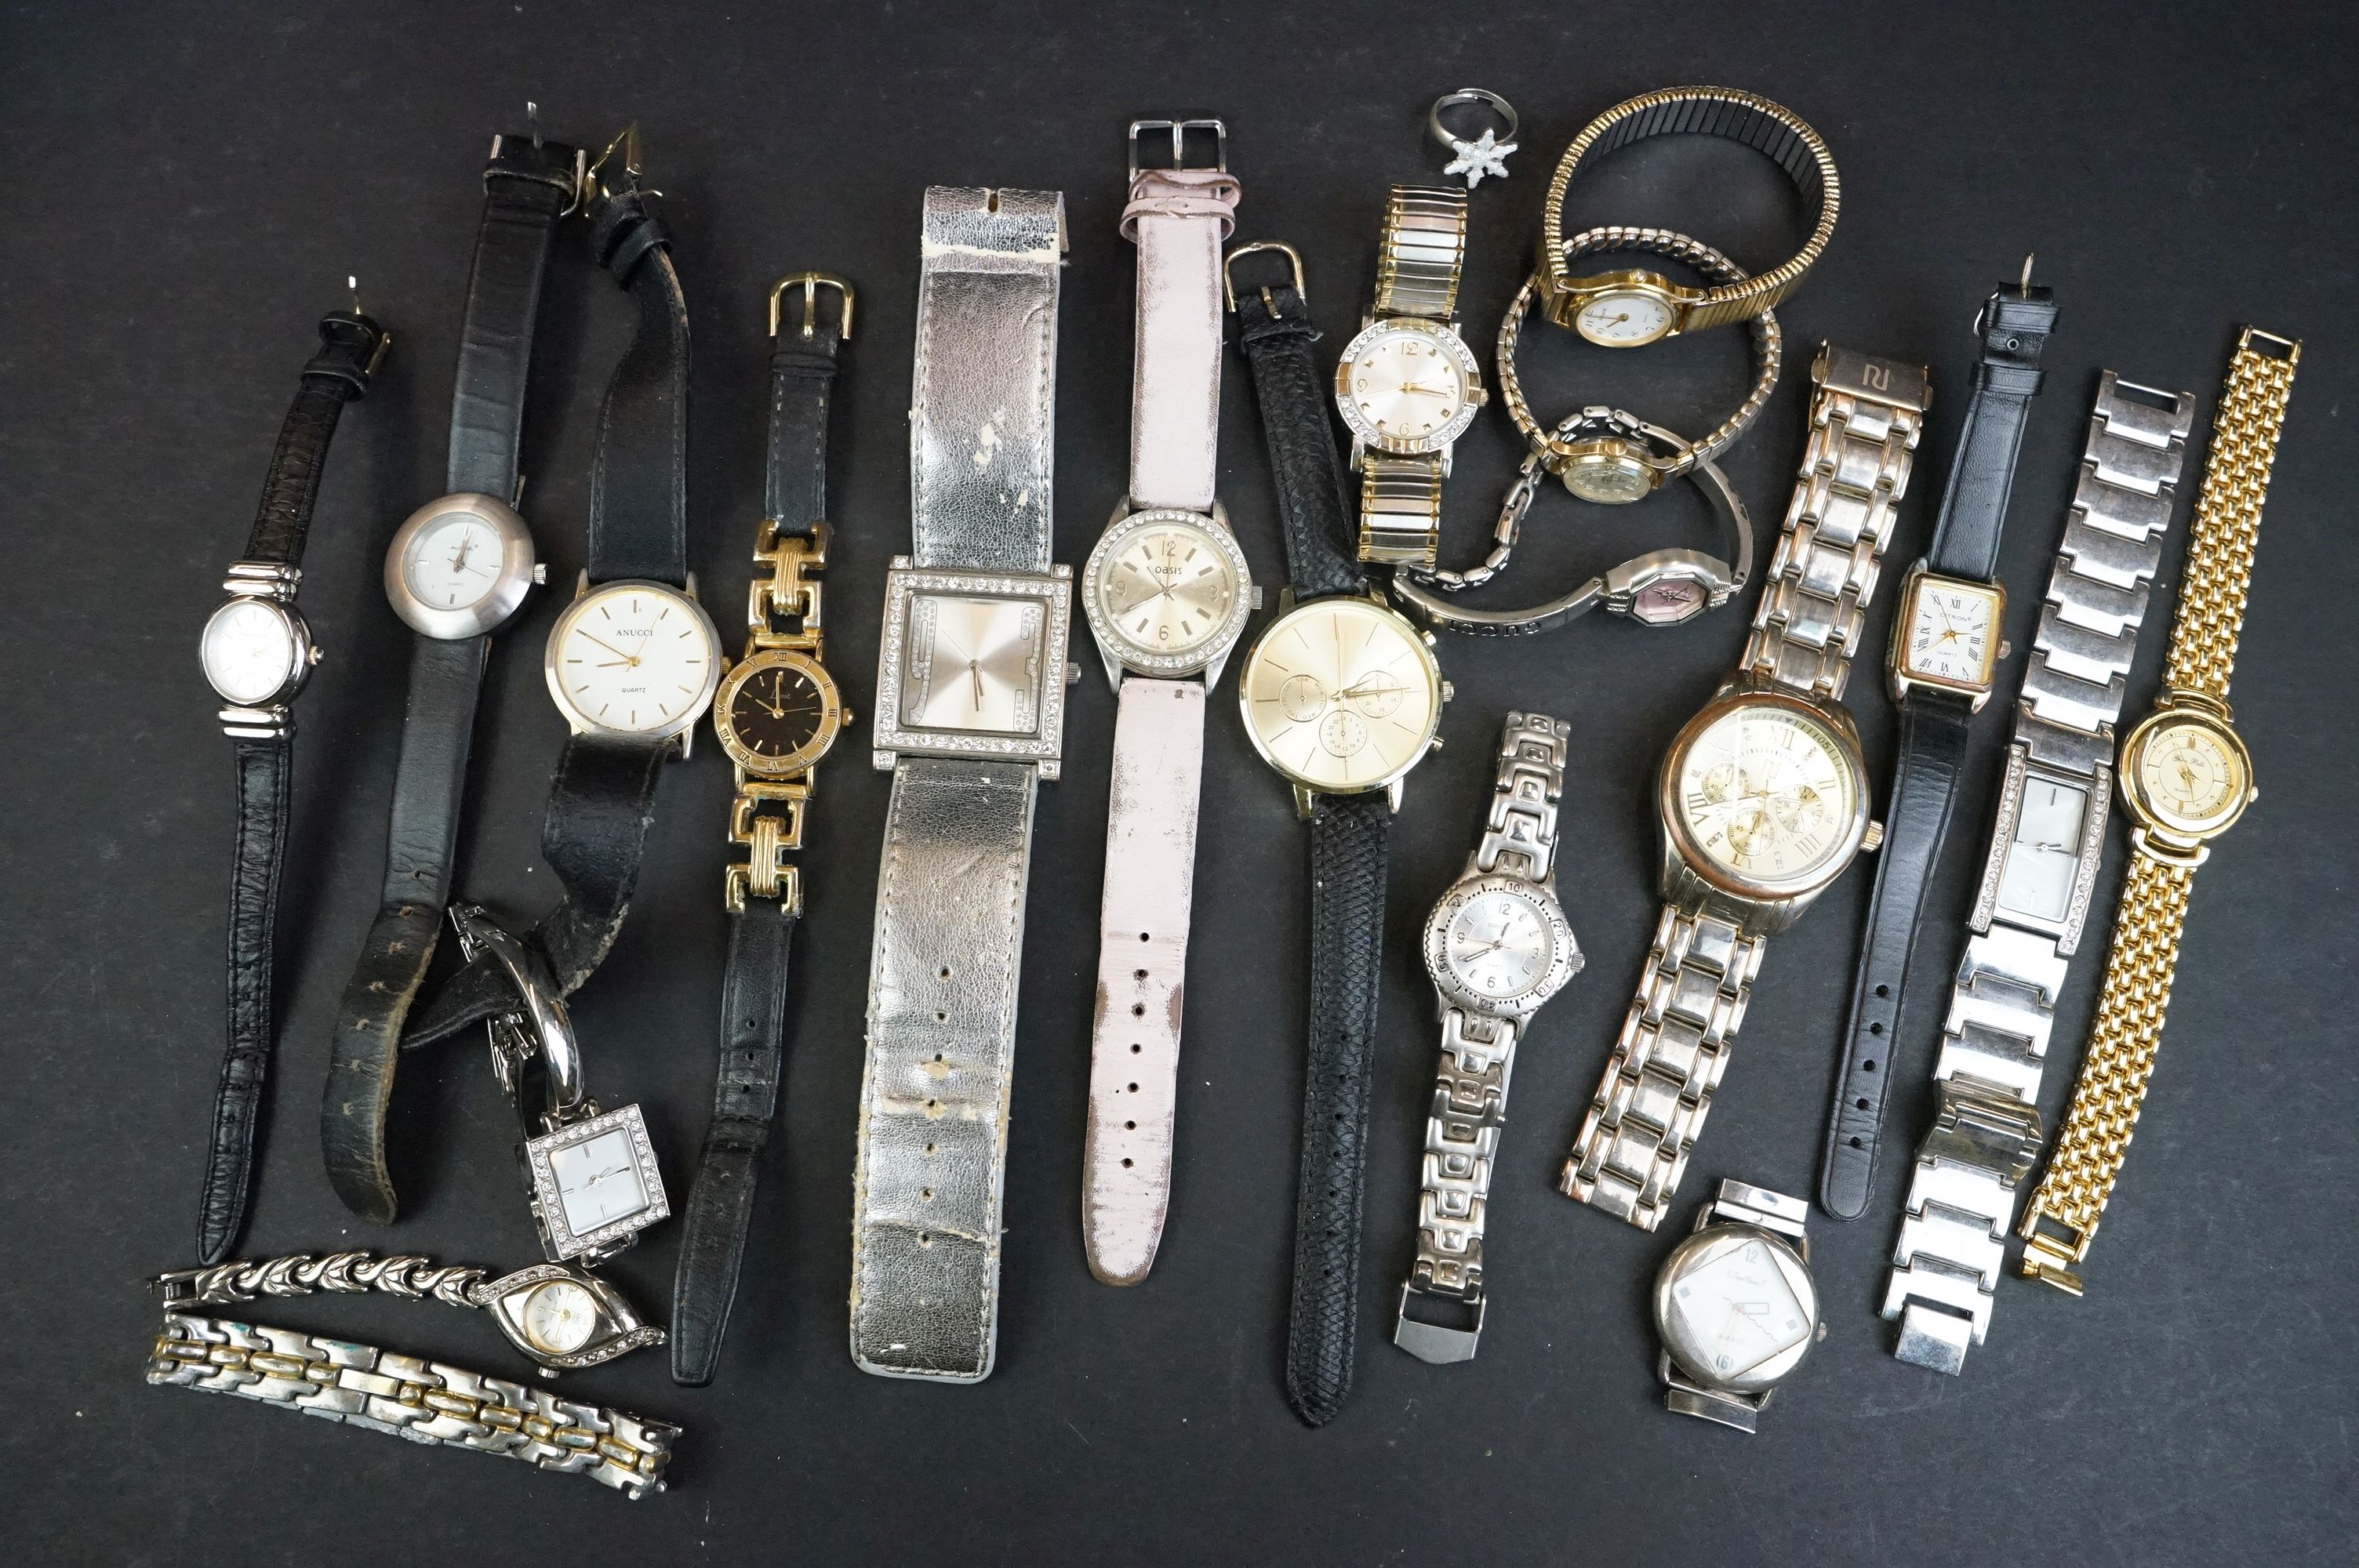 Collection of approximately Nineteen Wristwatches including Sekonda, Gucci and Accurist